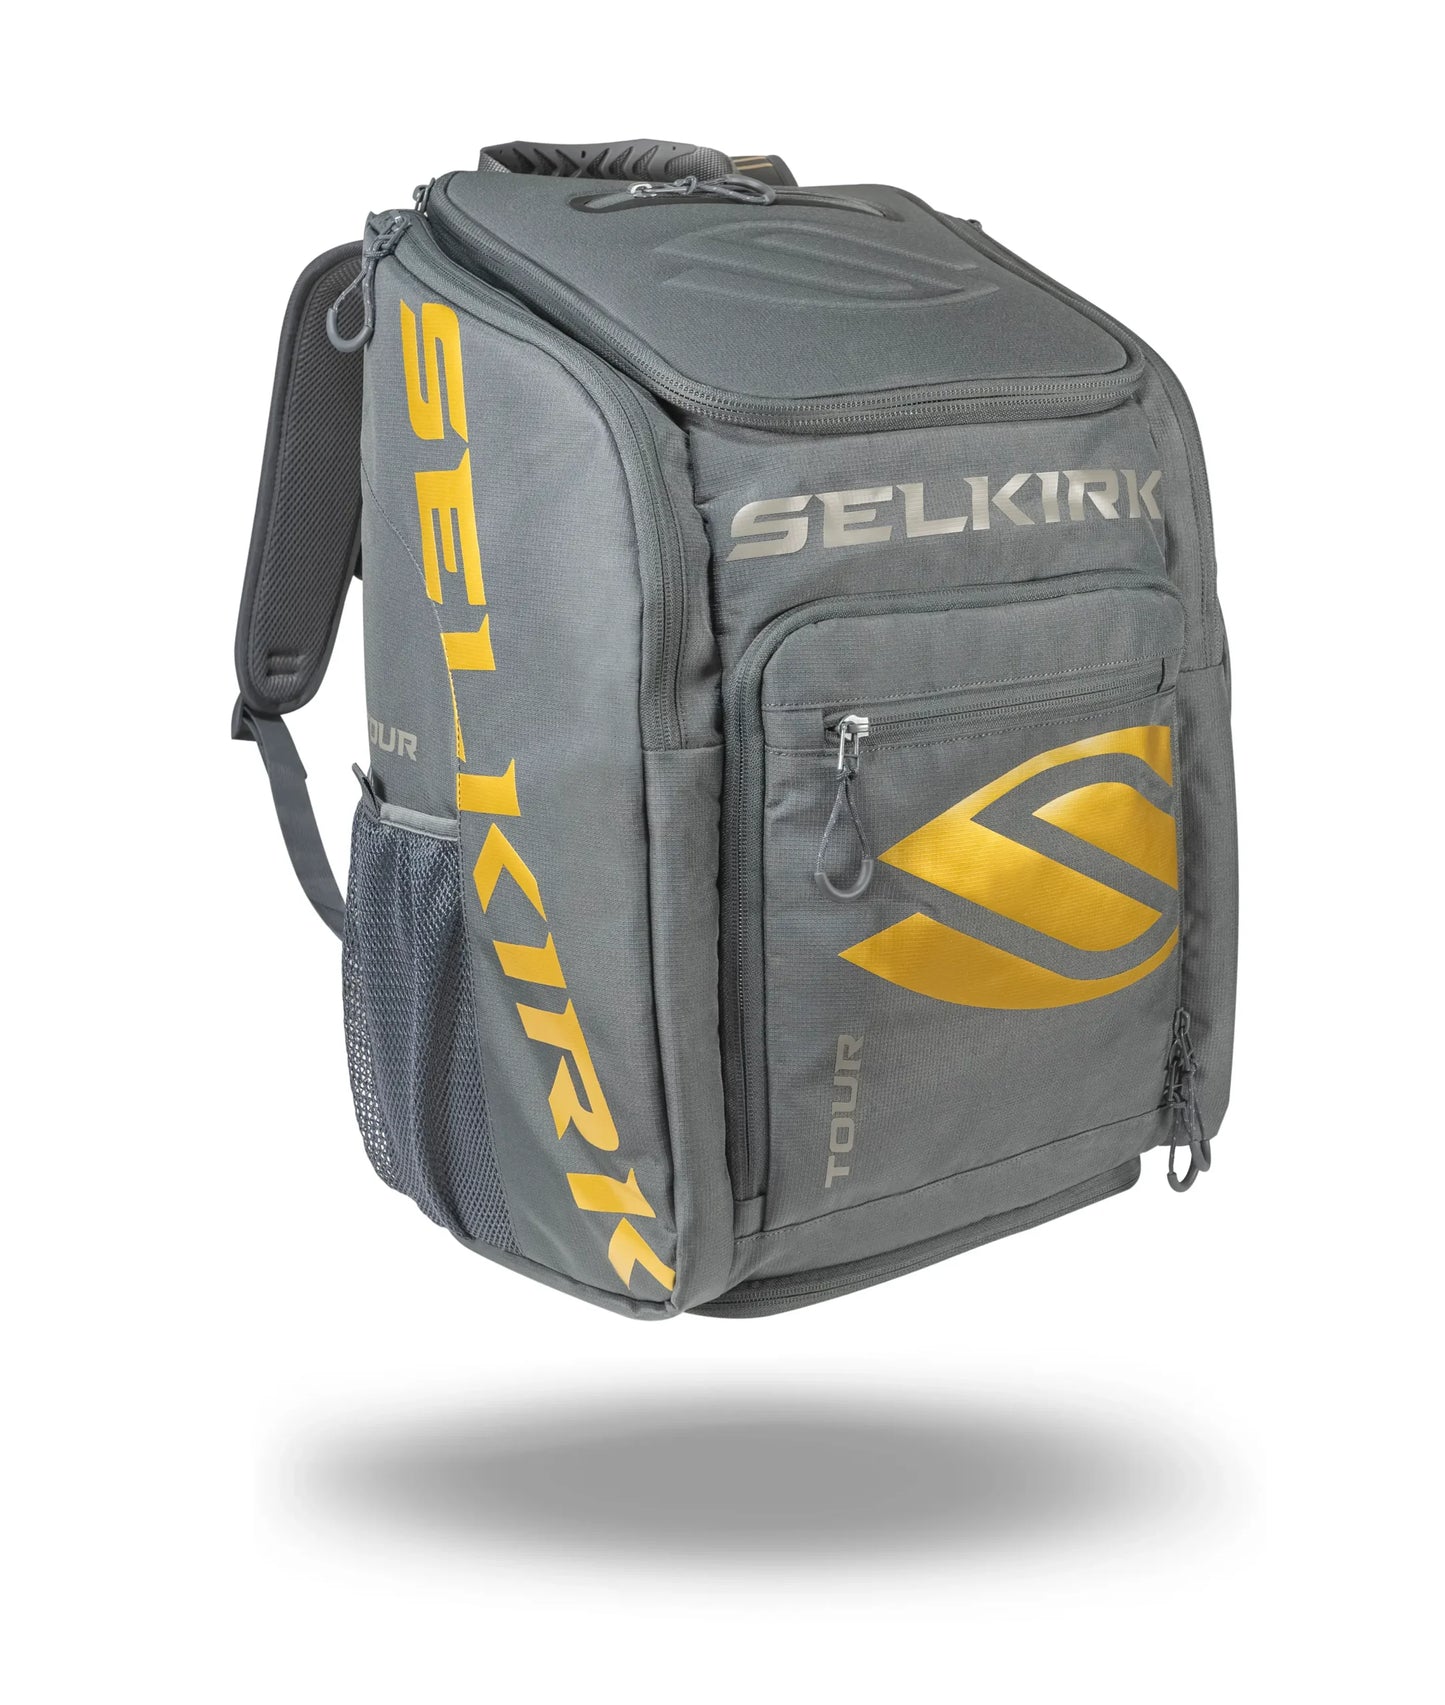 A grey and yellow Selkirk Tour Backpack (2022) Pickleball Bag with the brand name Selkirk on it.